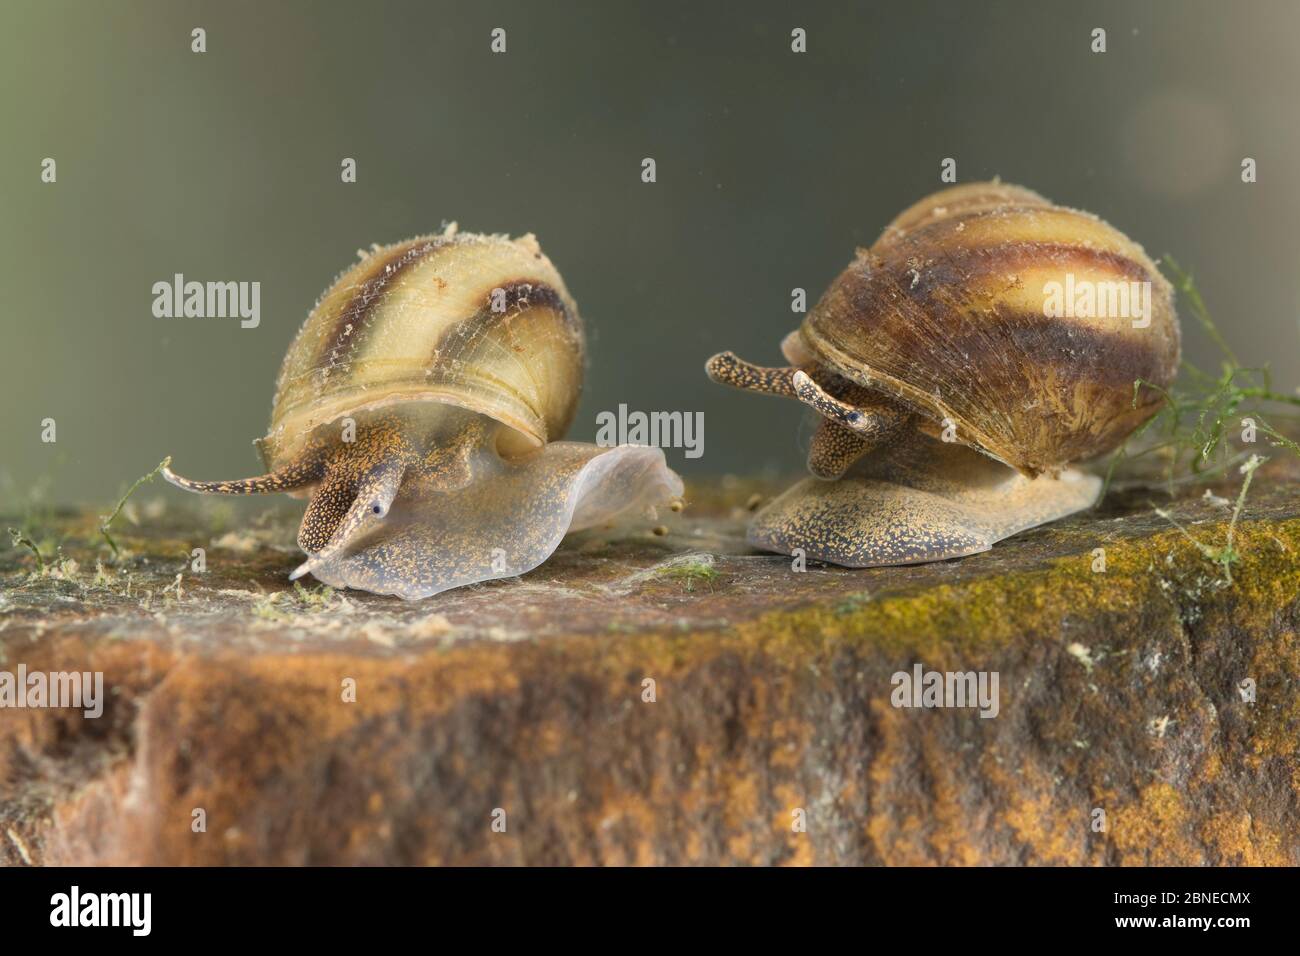 River snails (Viviparus contectus), Europe, July.  Controlled conditions. Stock Photo